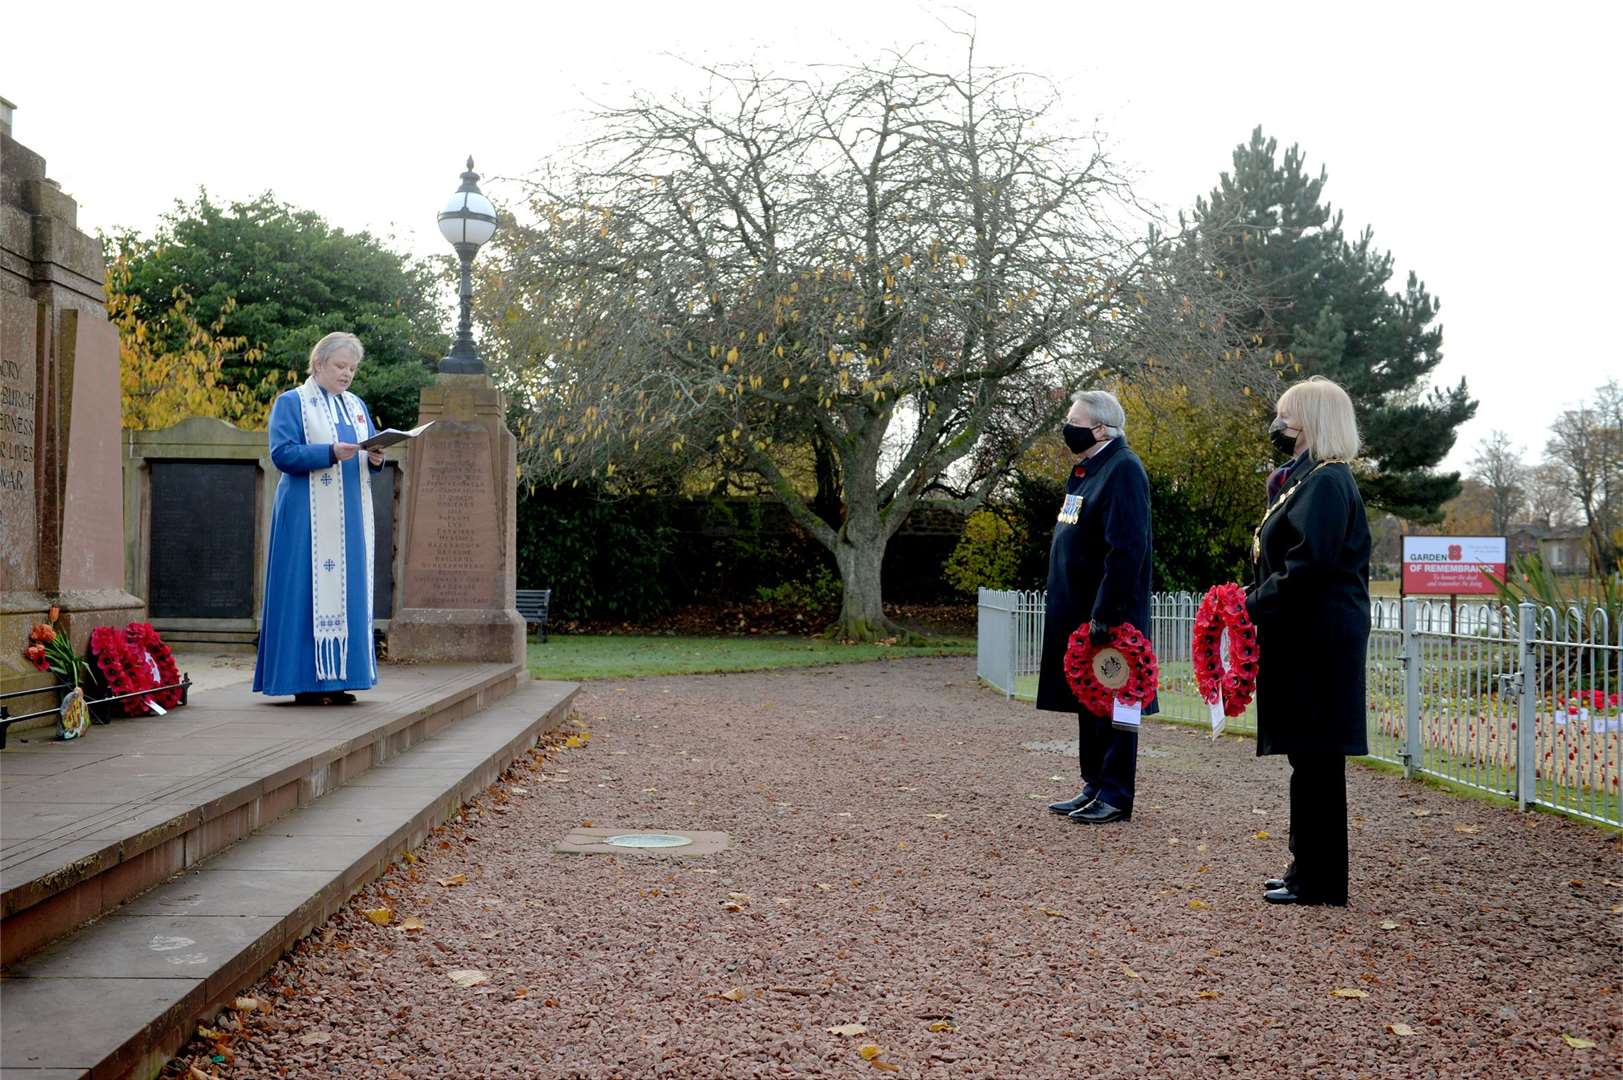 Inverness Provost Helen Carmichael and Vice Lord Lieutenant Colonel Douglas Young place wreaths at the war memorial in Cavell Gardens, Inverness, watched by Rev Fiona Smith, moderator of Inverness Presbytery.